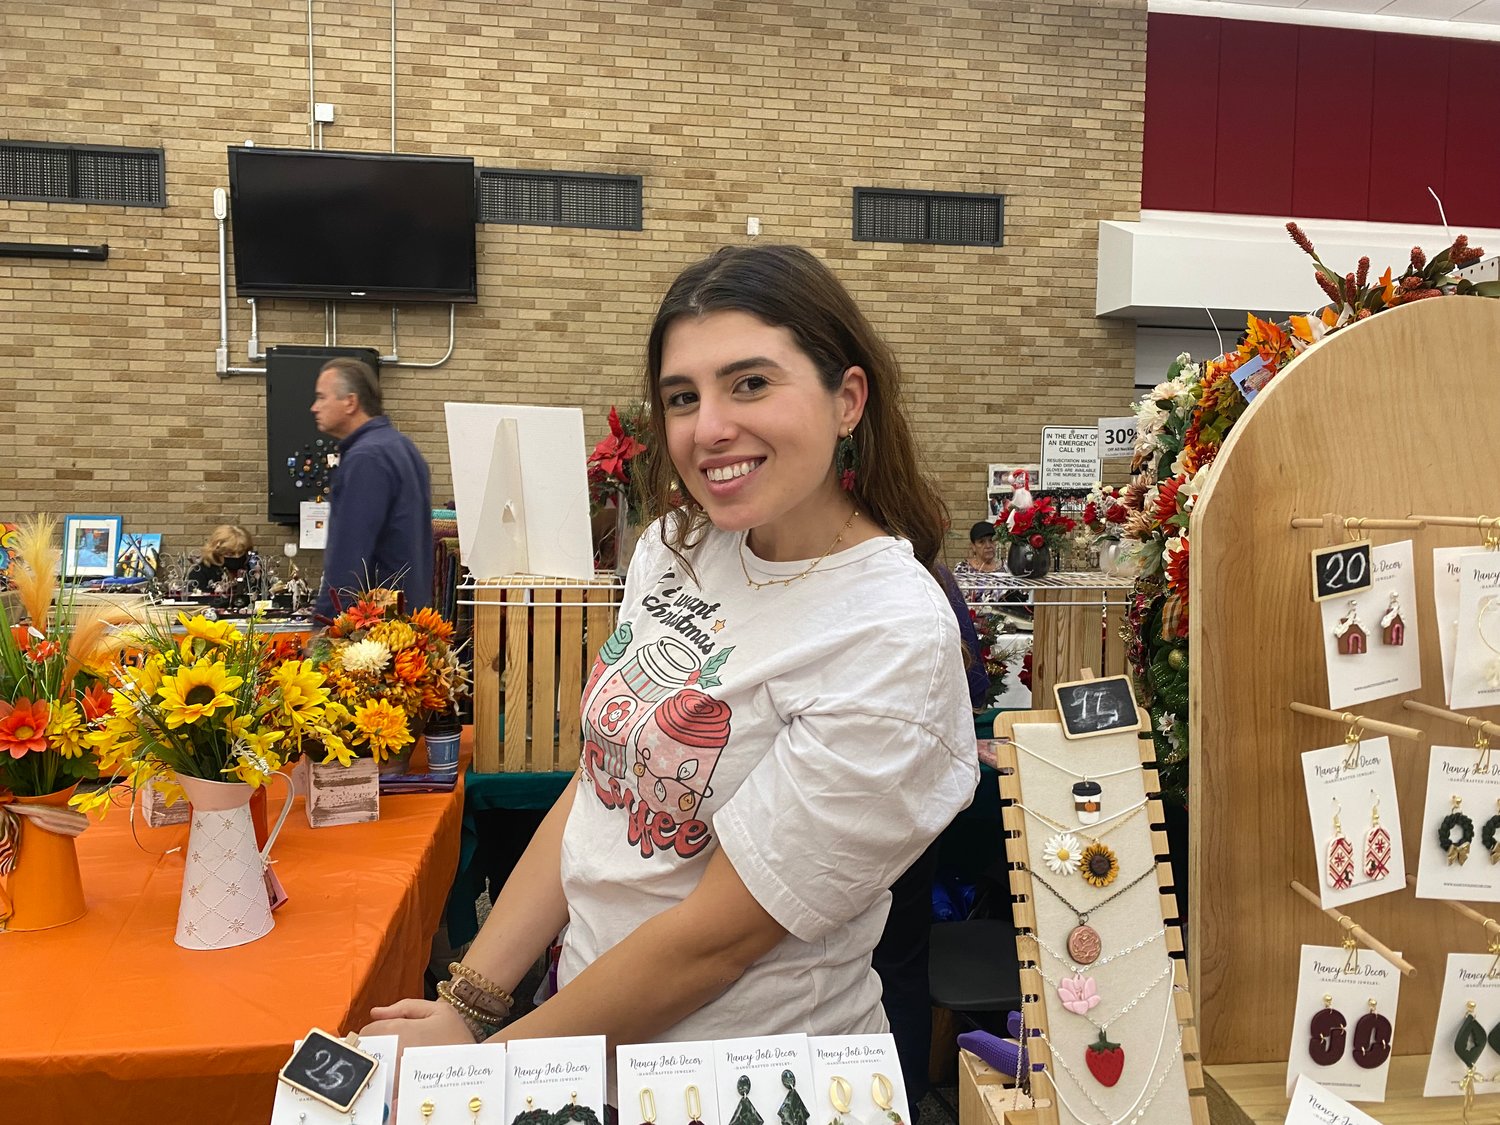 Nancy Joli Decor shows off some of her amazing earrings for sale at the fair. She makes floral wreaths, polymer clay jewelry and wooden home decor. Follow her on Instagram at @NancyJoliDecor.